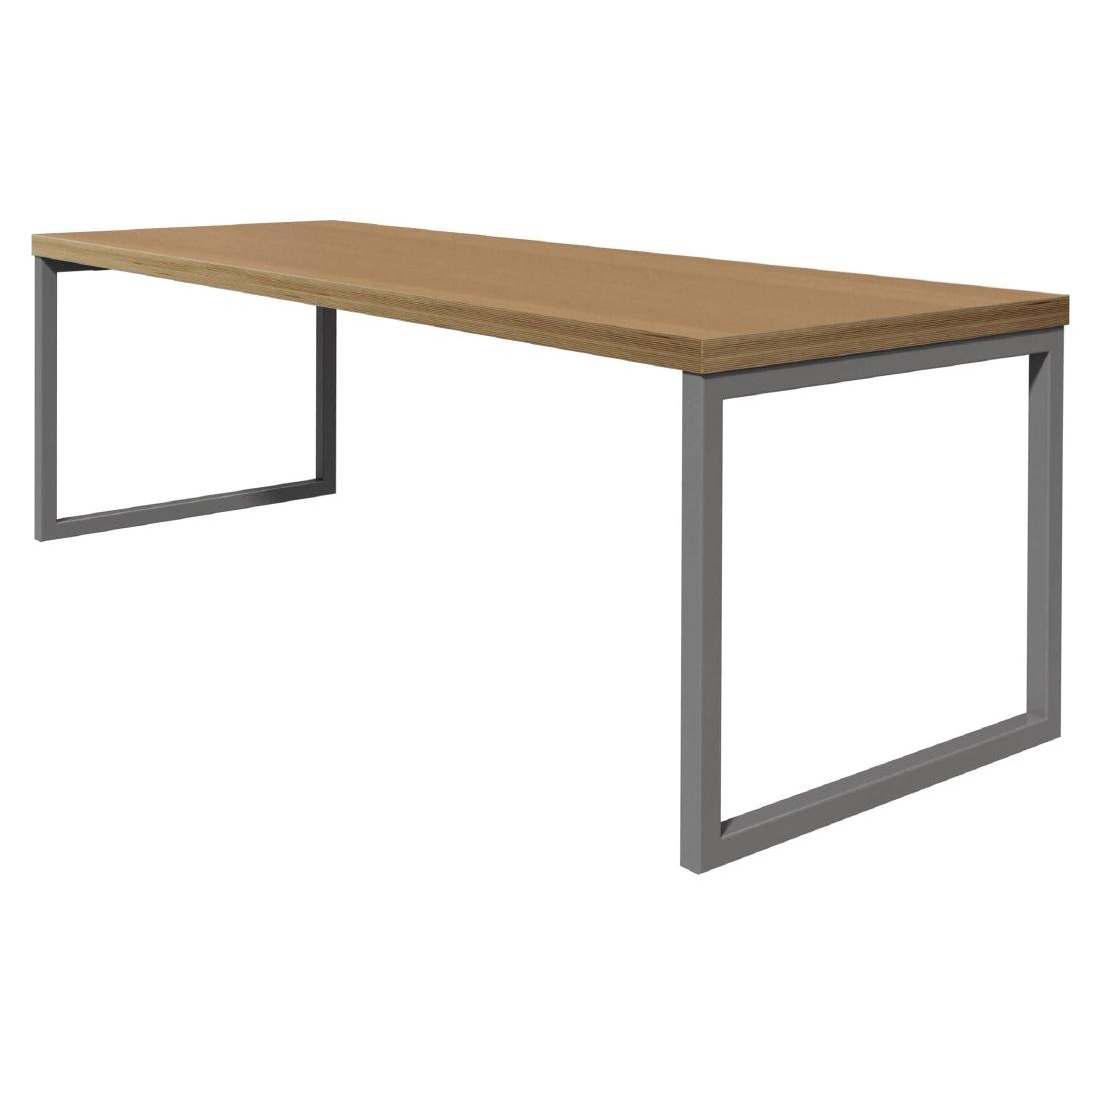 Bolero Dining Table Beech Effect with Silver Frame 7ft